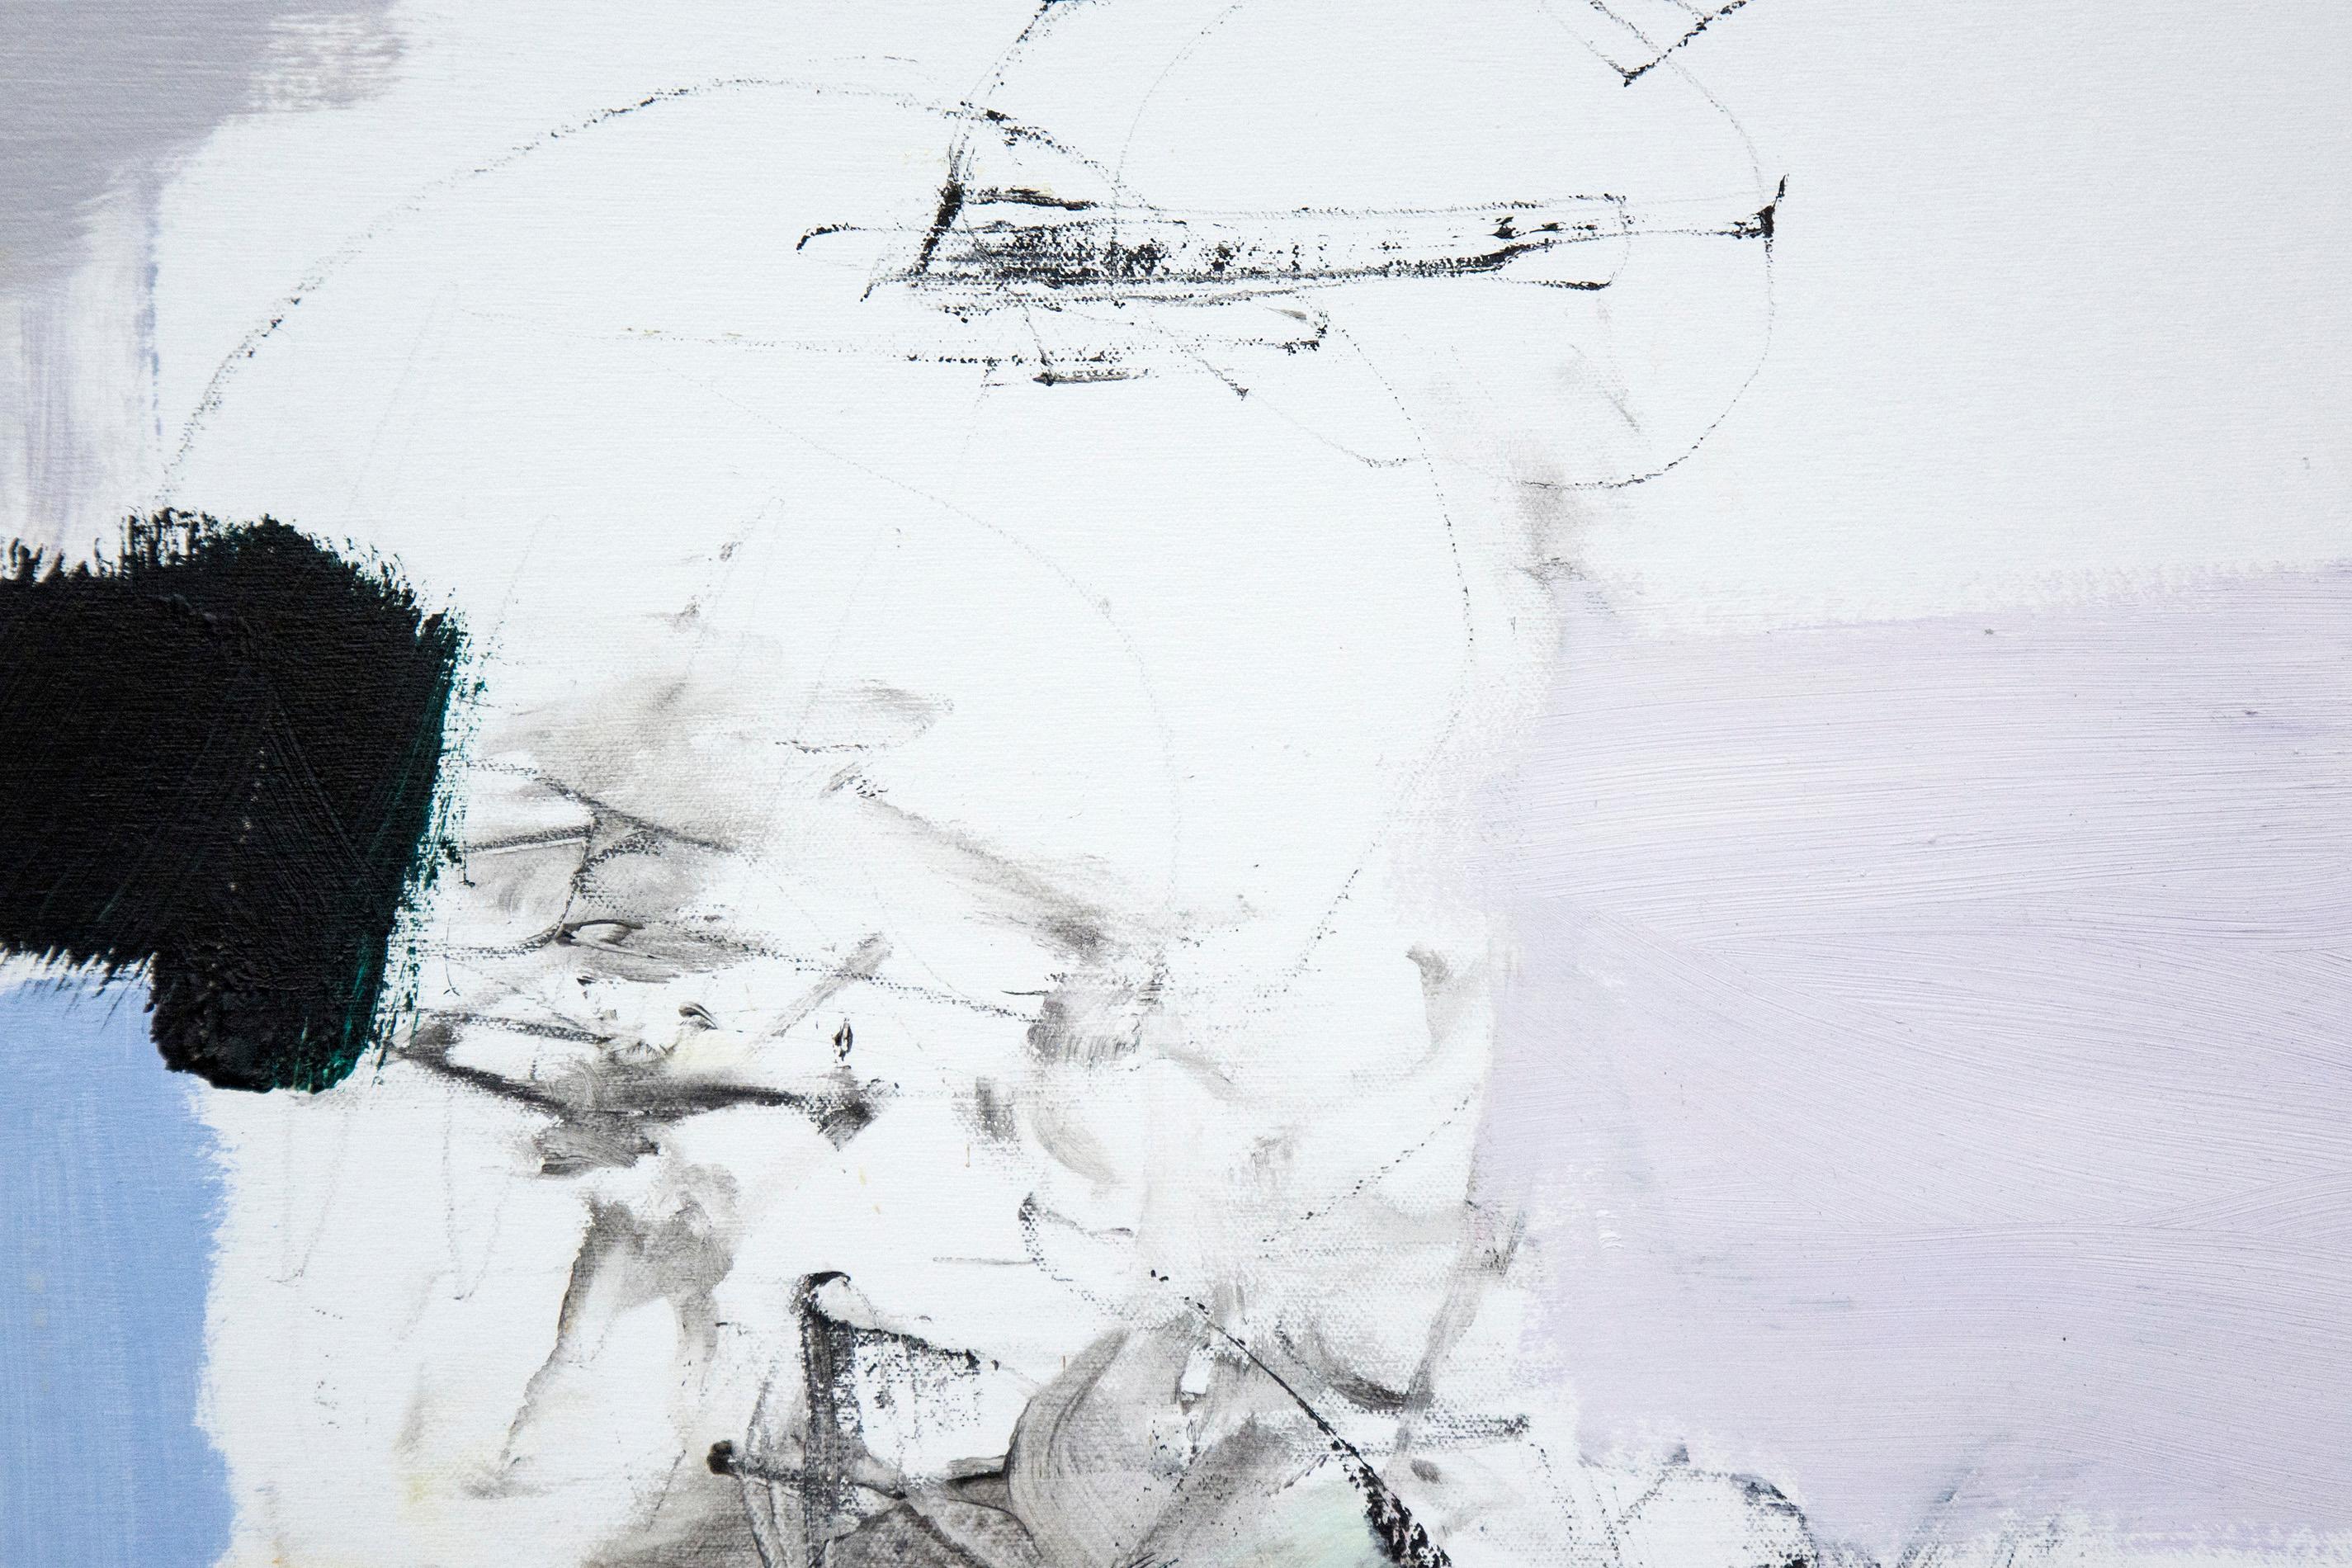 The palette is subtle: the gestural brushstrokes expressive—This is an earlier abstract painting by Scott Pattinson. The Canadian artist is known for his intuitive use of colour.
Here the palette is an elegant mix of soft gray, pale blue, a touch of